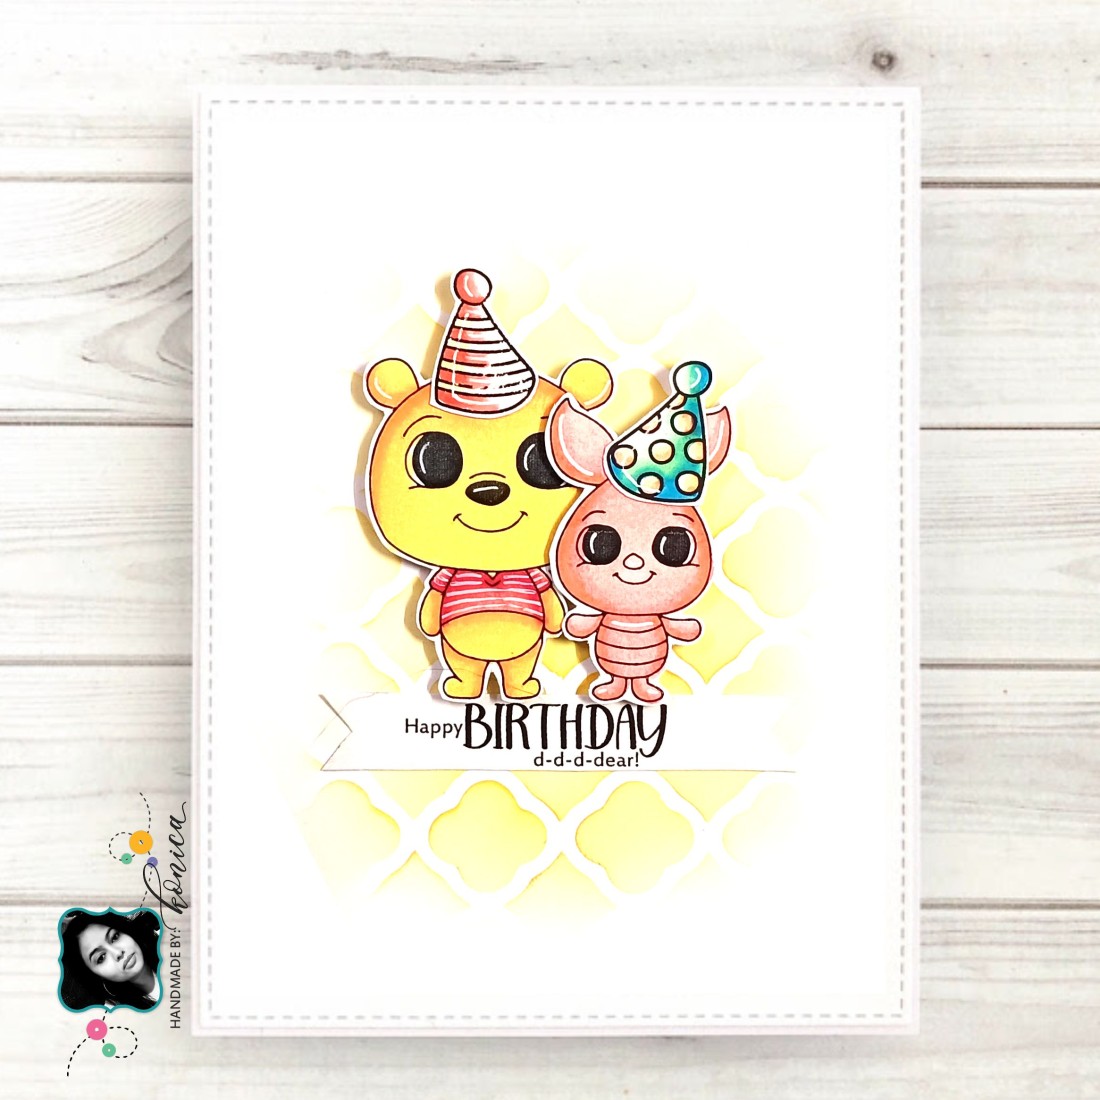 Craftyscrappers Stamps- OH D-D-D-DEAR